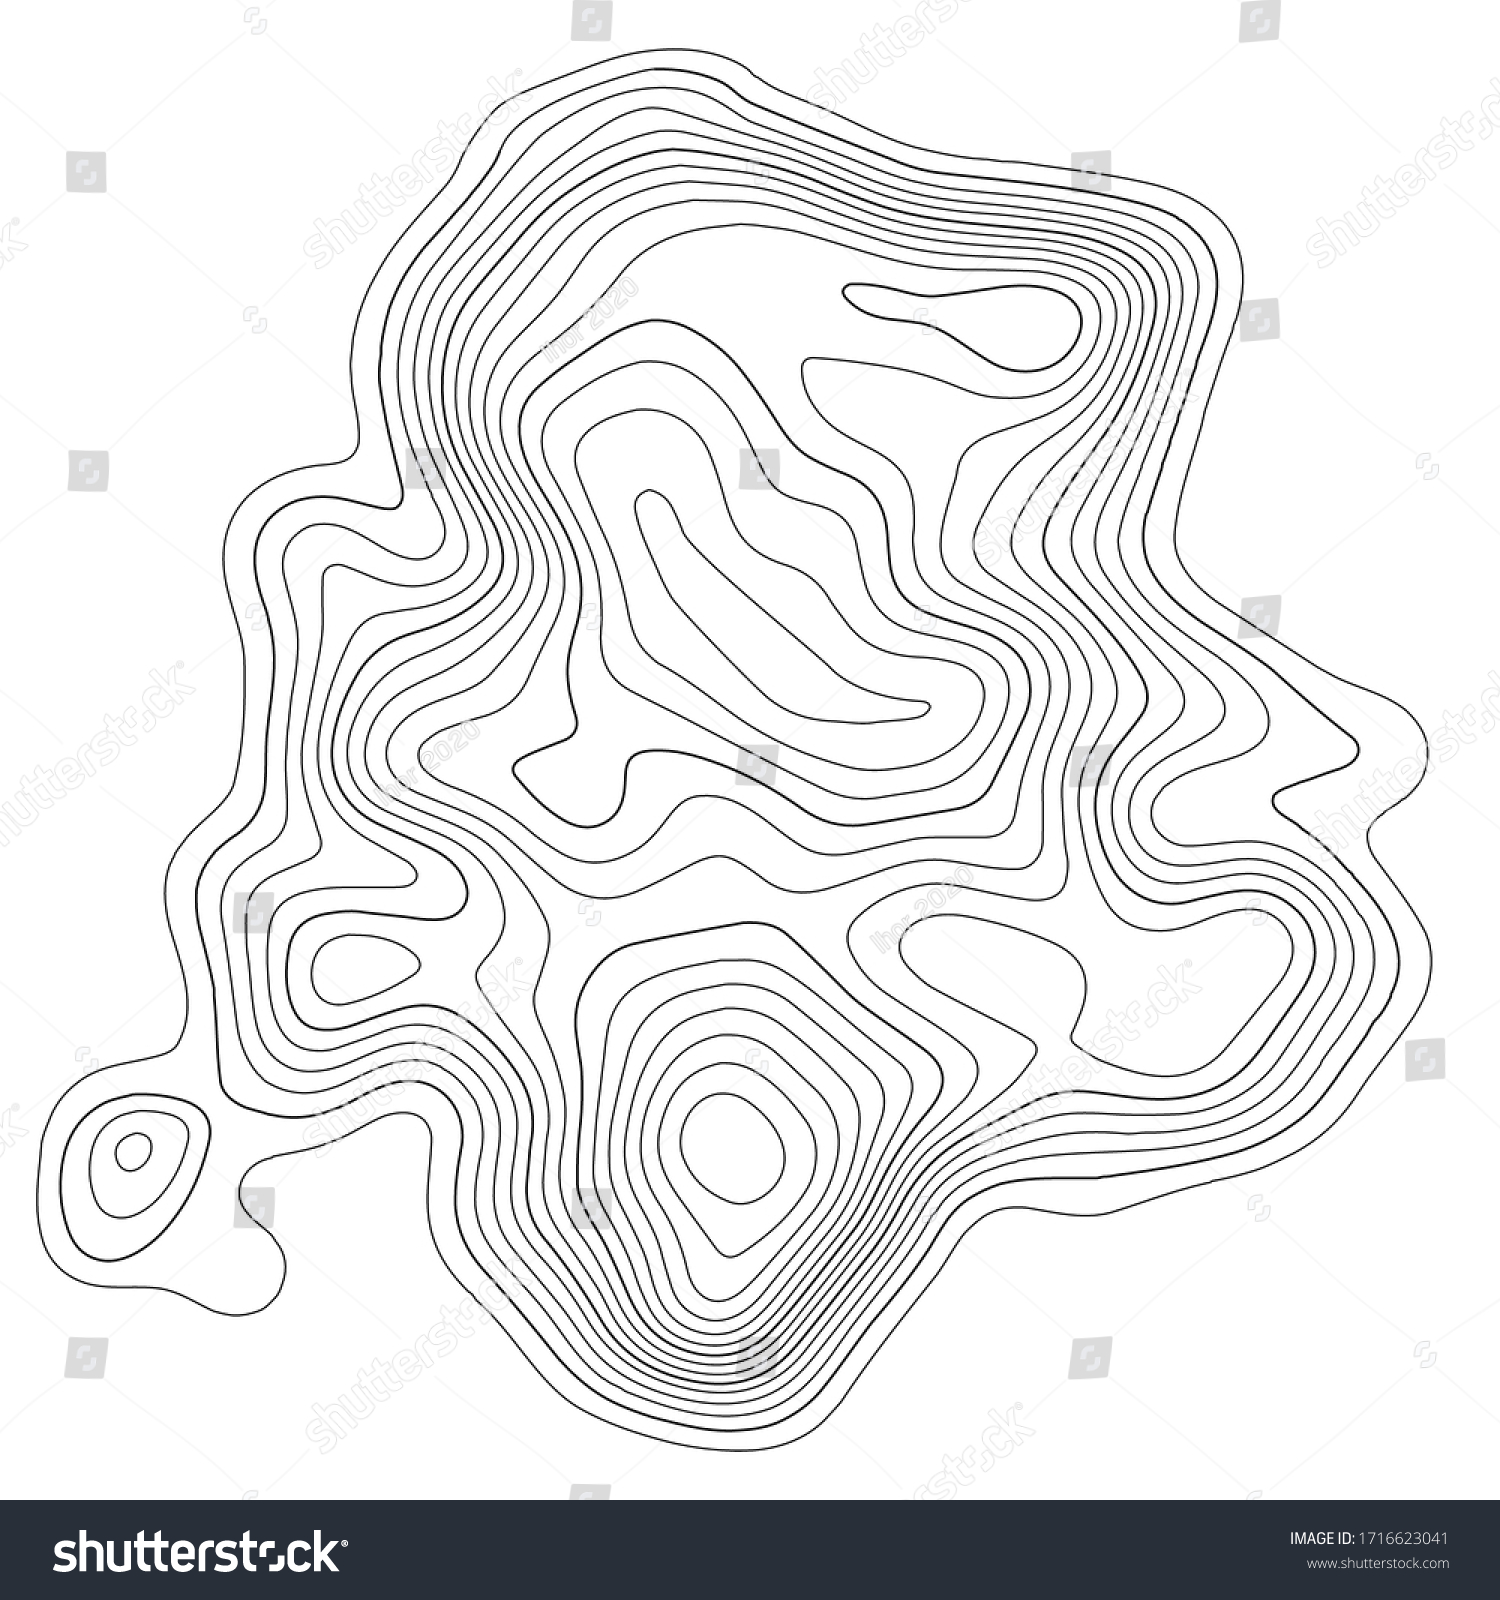 SVG of Contour topographic map. Geographic grid map background. Black lines on white background. Vector illustration. svg